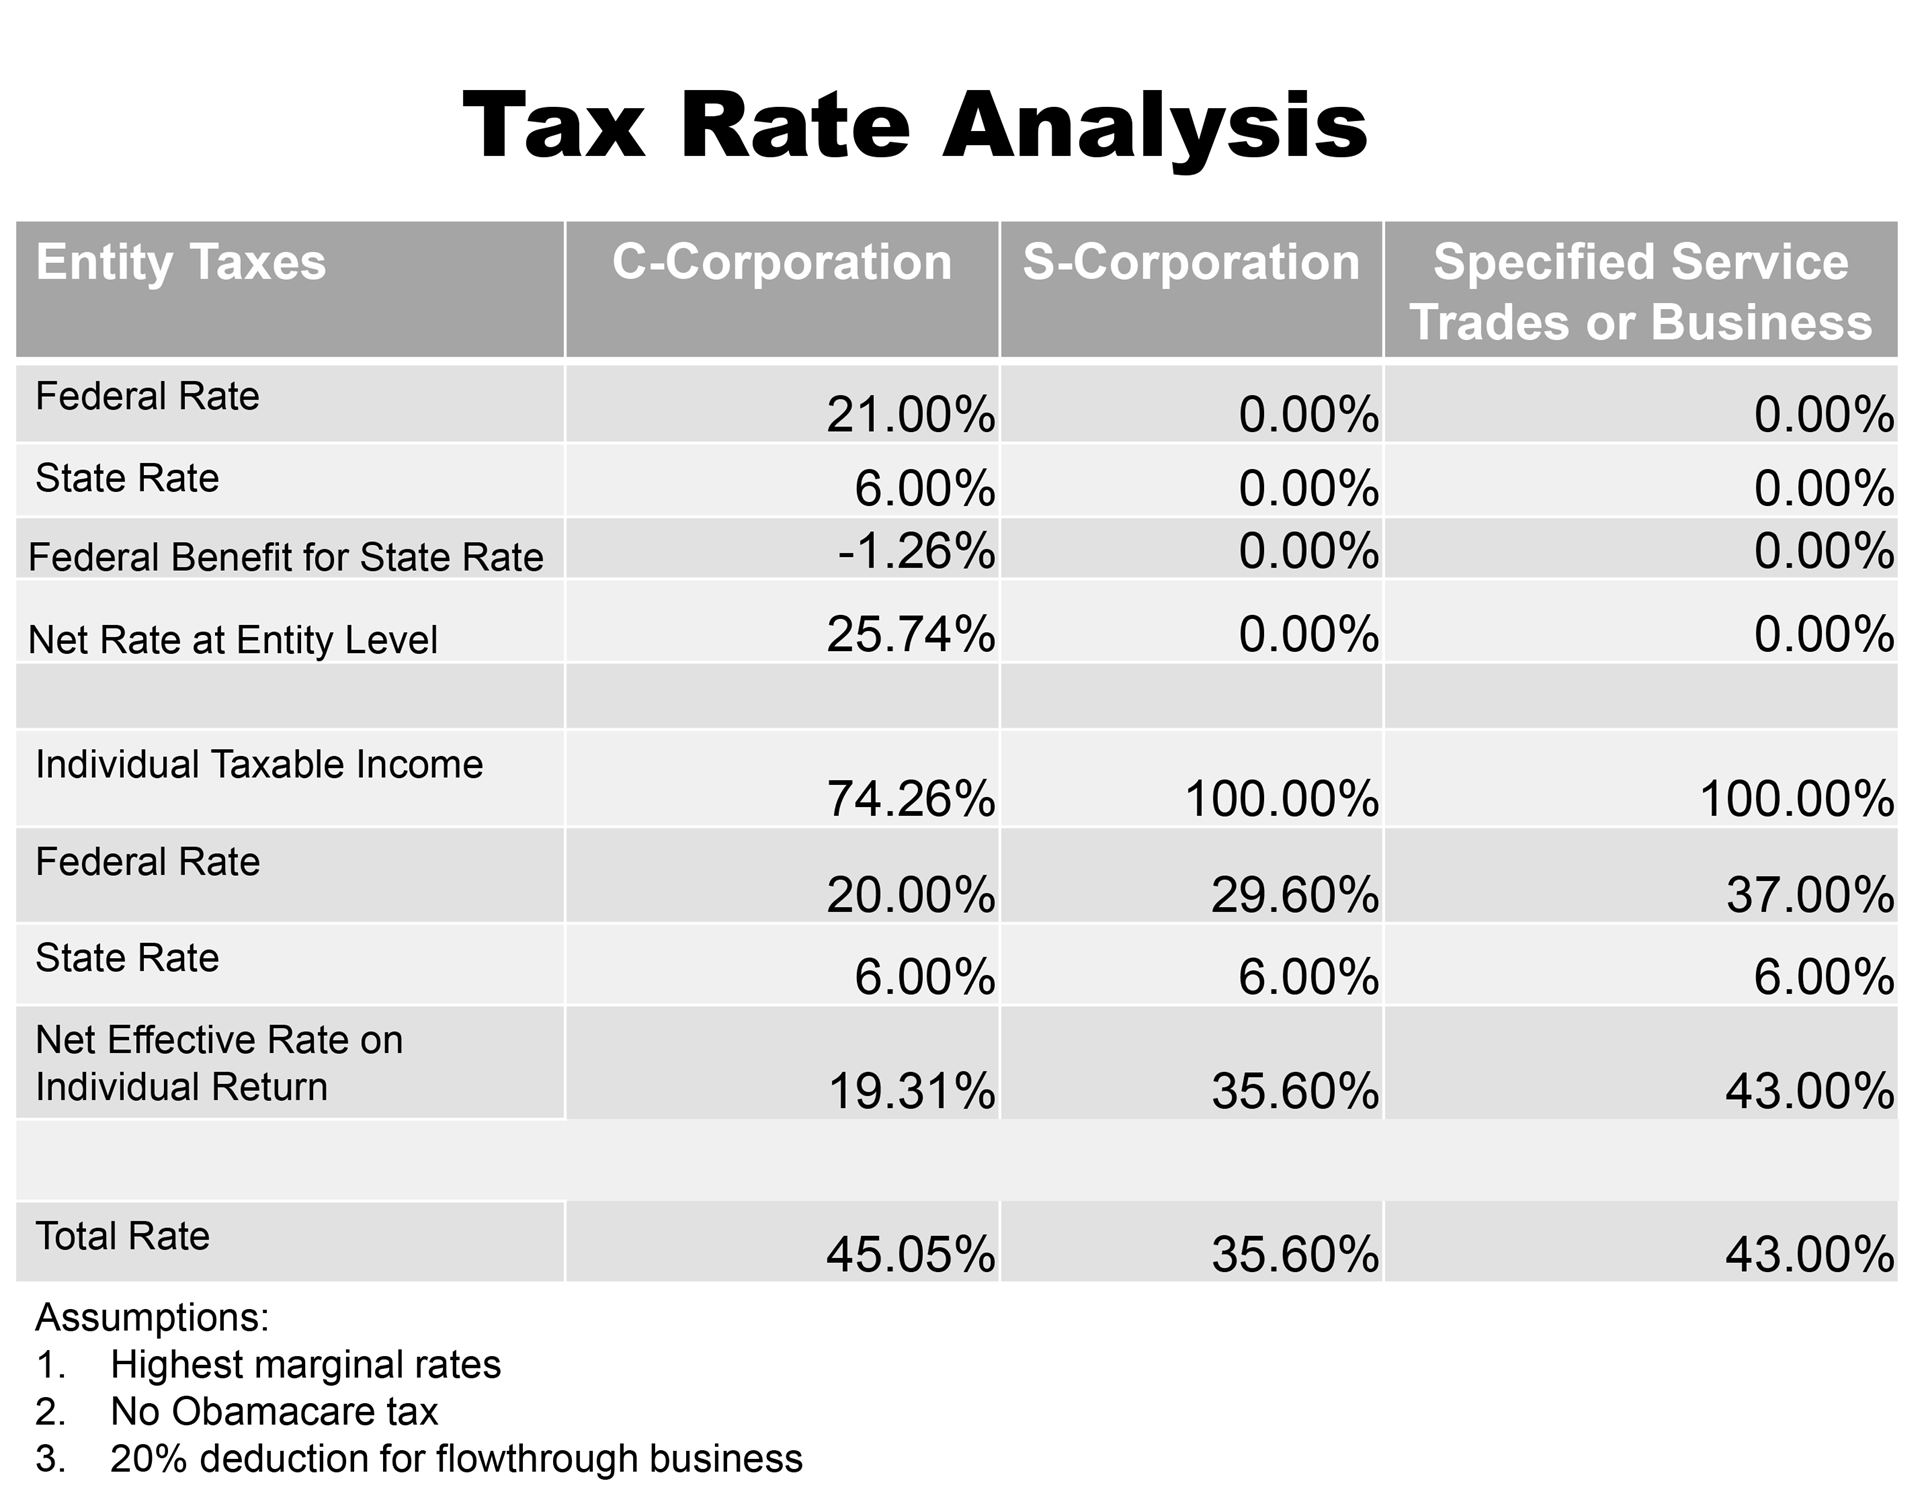 Tax Treatment For C Corporations And S Corporations Under The Tax Cuts And  Jobs Act - Smith And Howard - Cpa